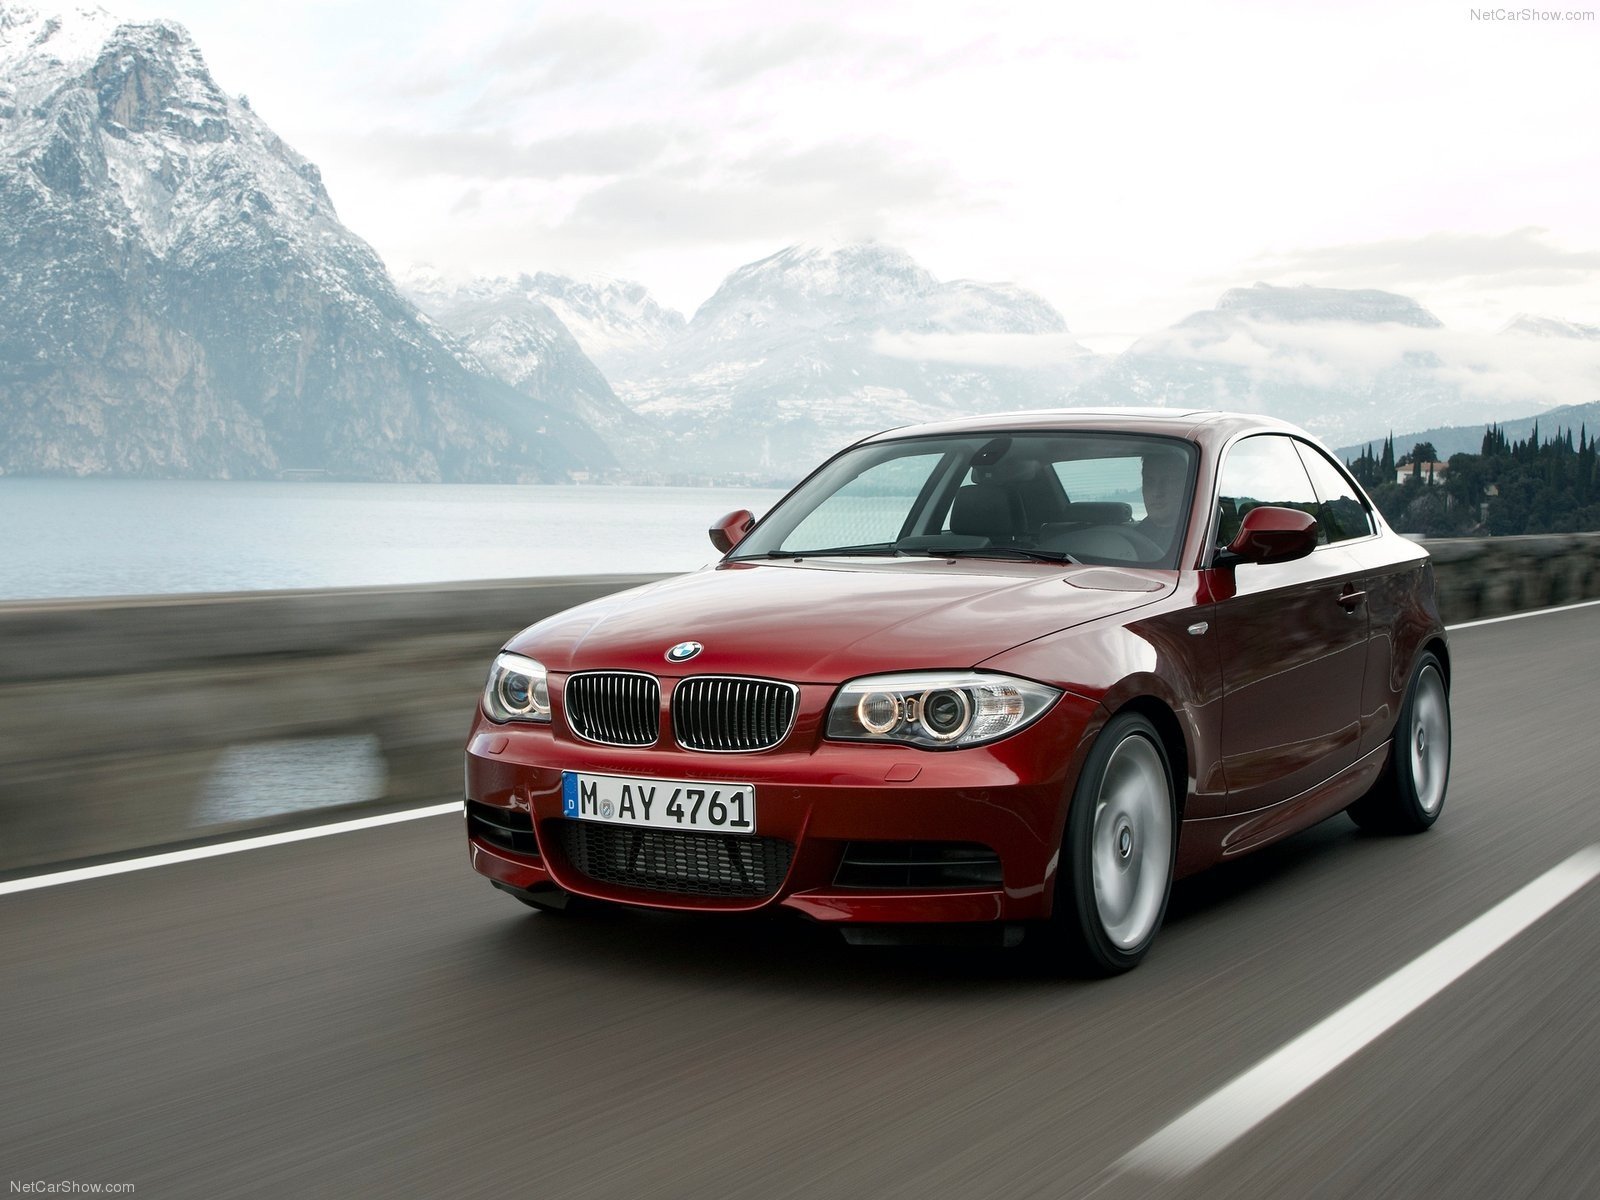 bmw, Cars, Coupe, Bmw, 1, Series, Bmw, 1 series, Coupe Wallpaper